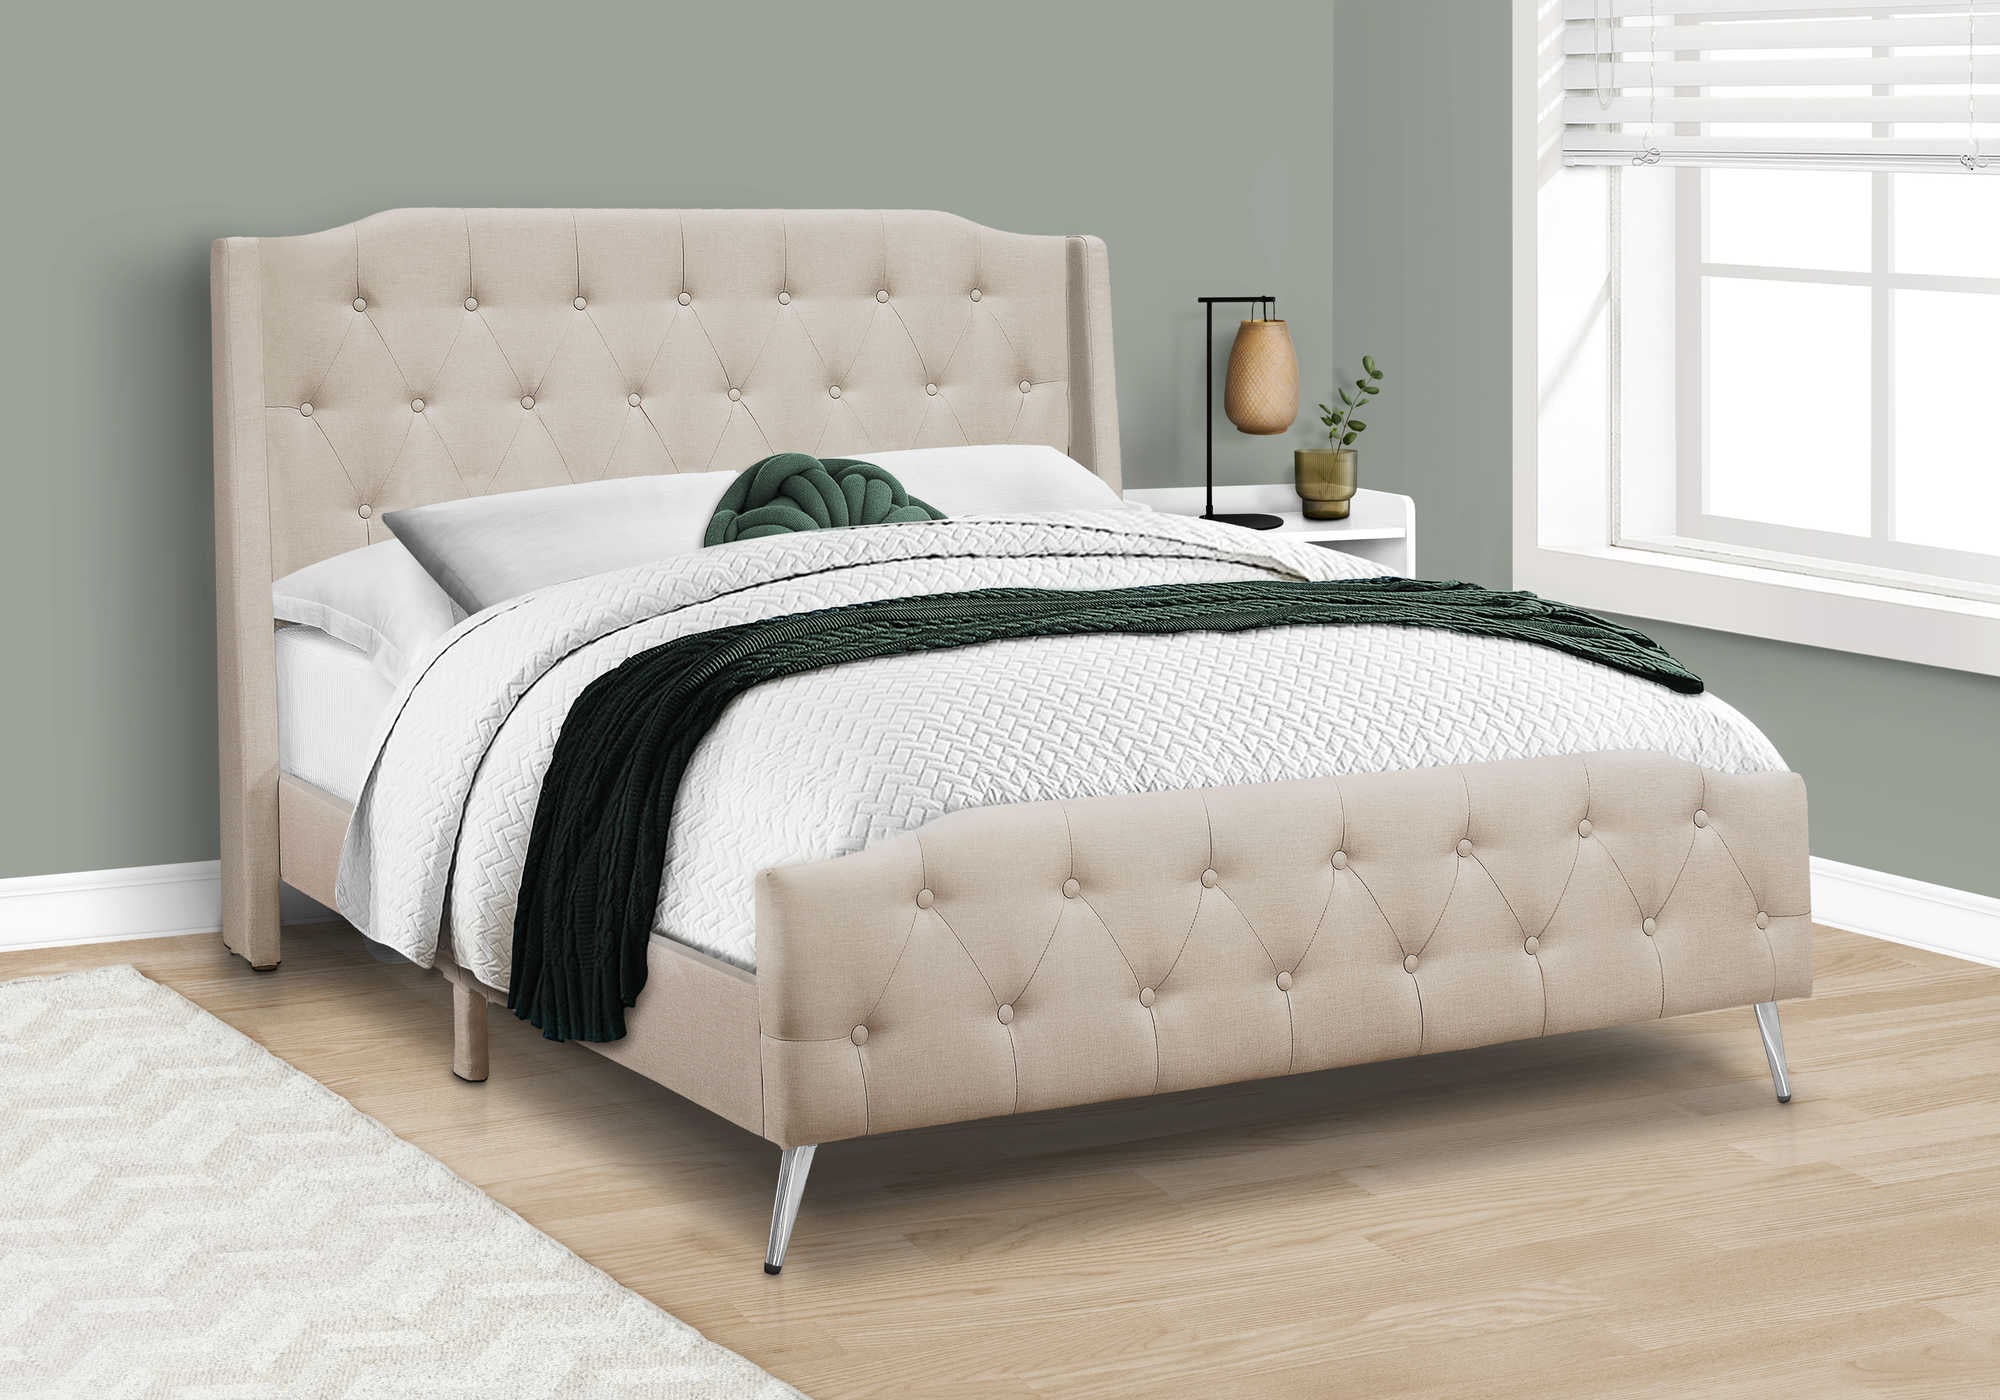 BED - QUEEN SIZE / BEIGE LINEN WITH CHROME METAL LEGS i 6046Q